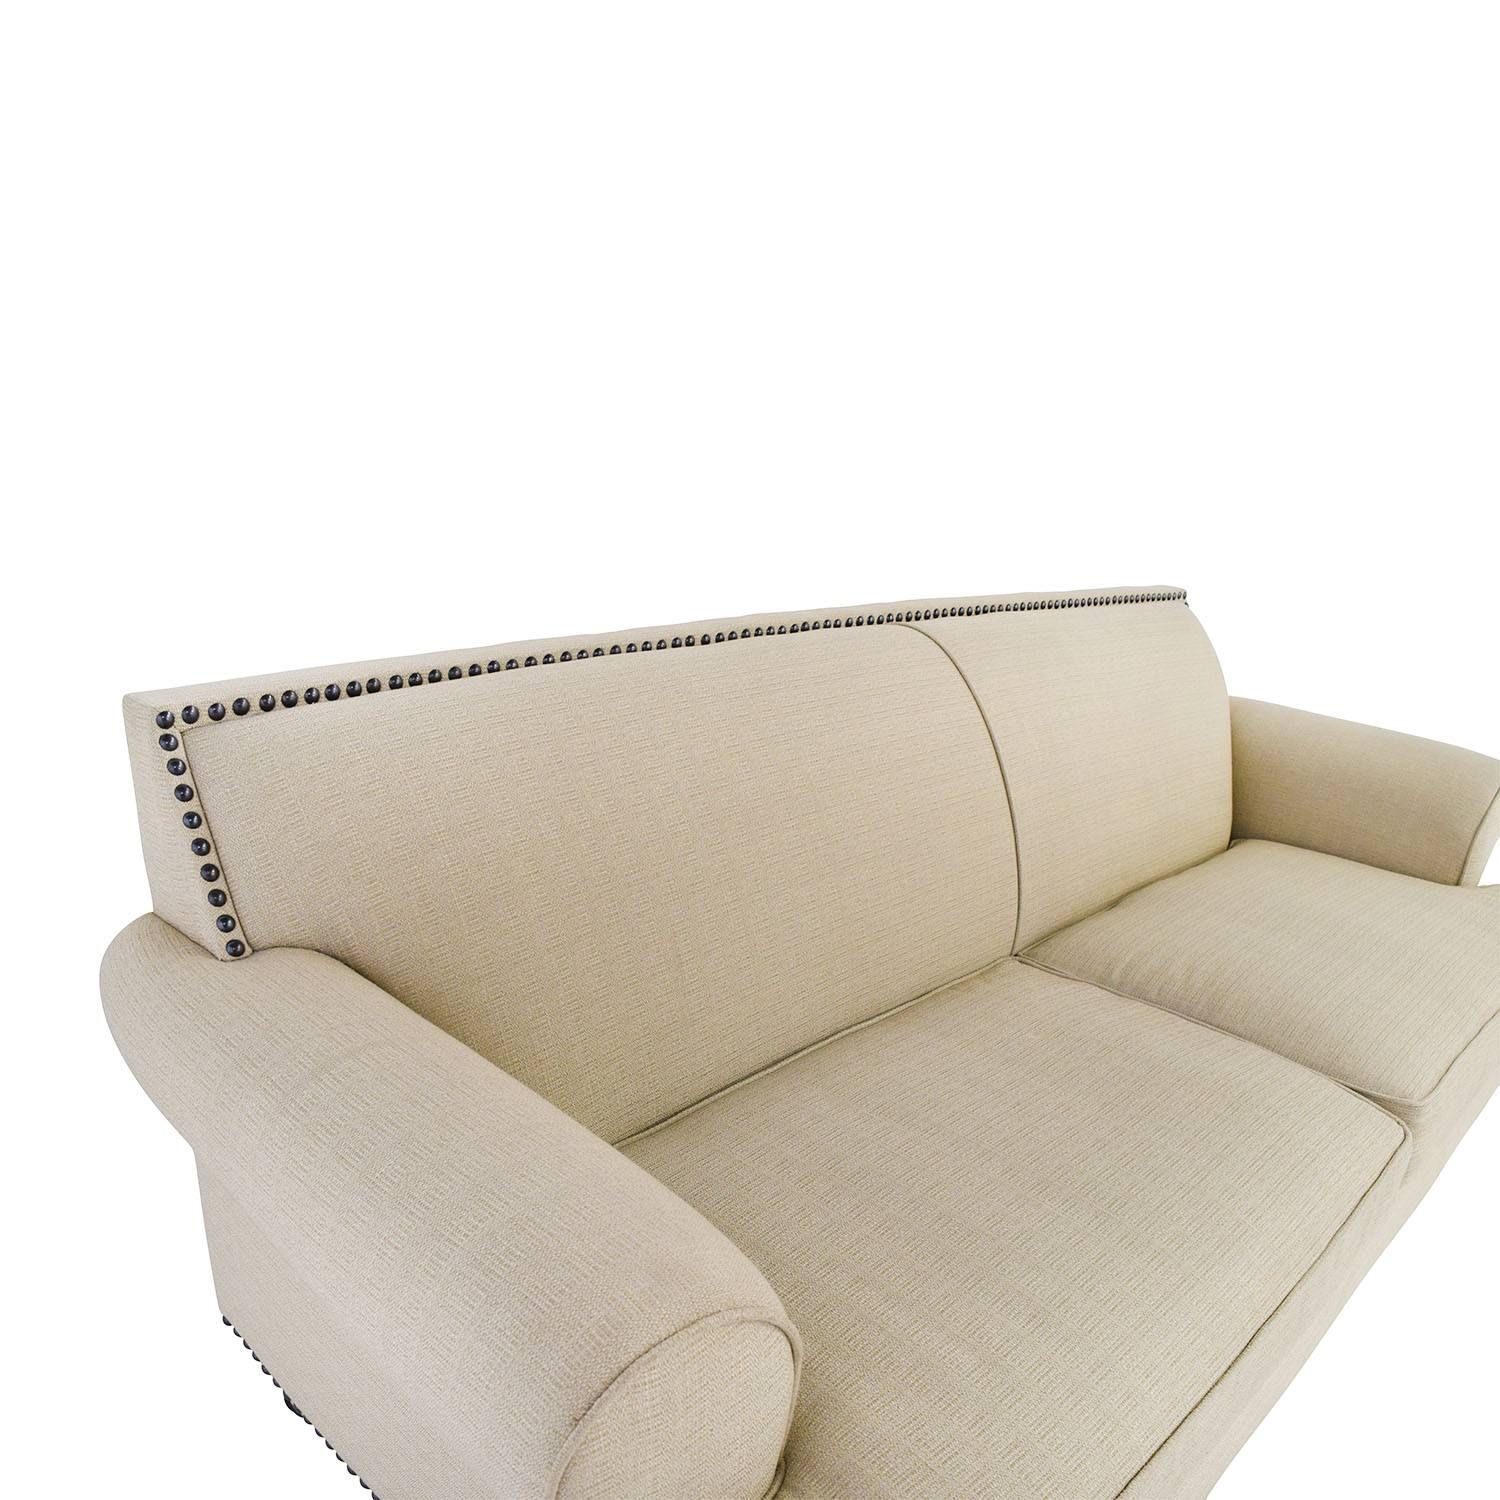 48% Off – Pier 1 Pier 1 Carmen Tan Couch With Studs / Sofas With Pier 1 Sofas (View 8 of 15)